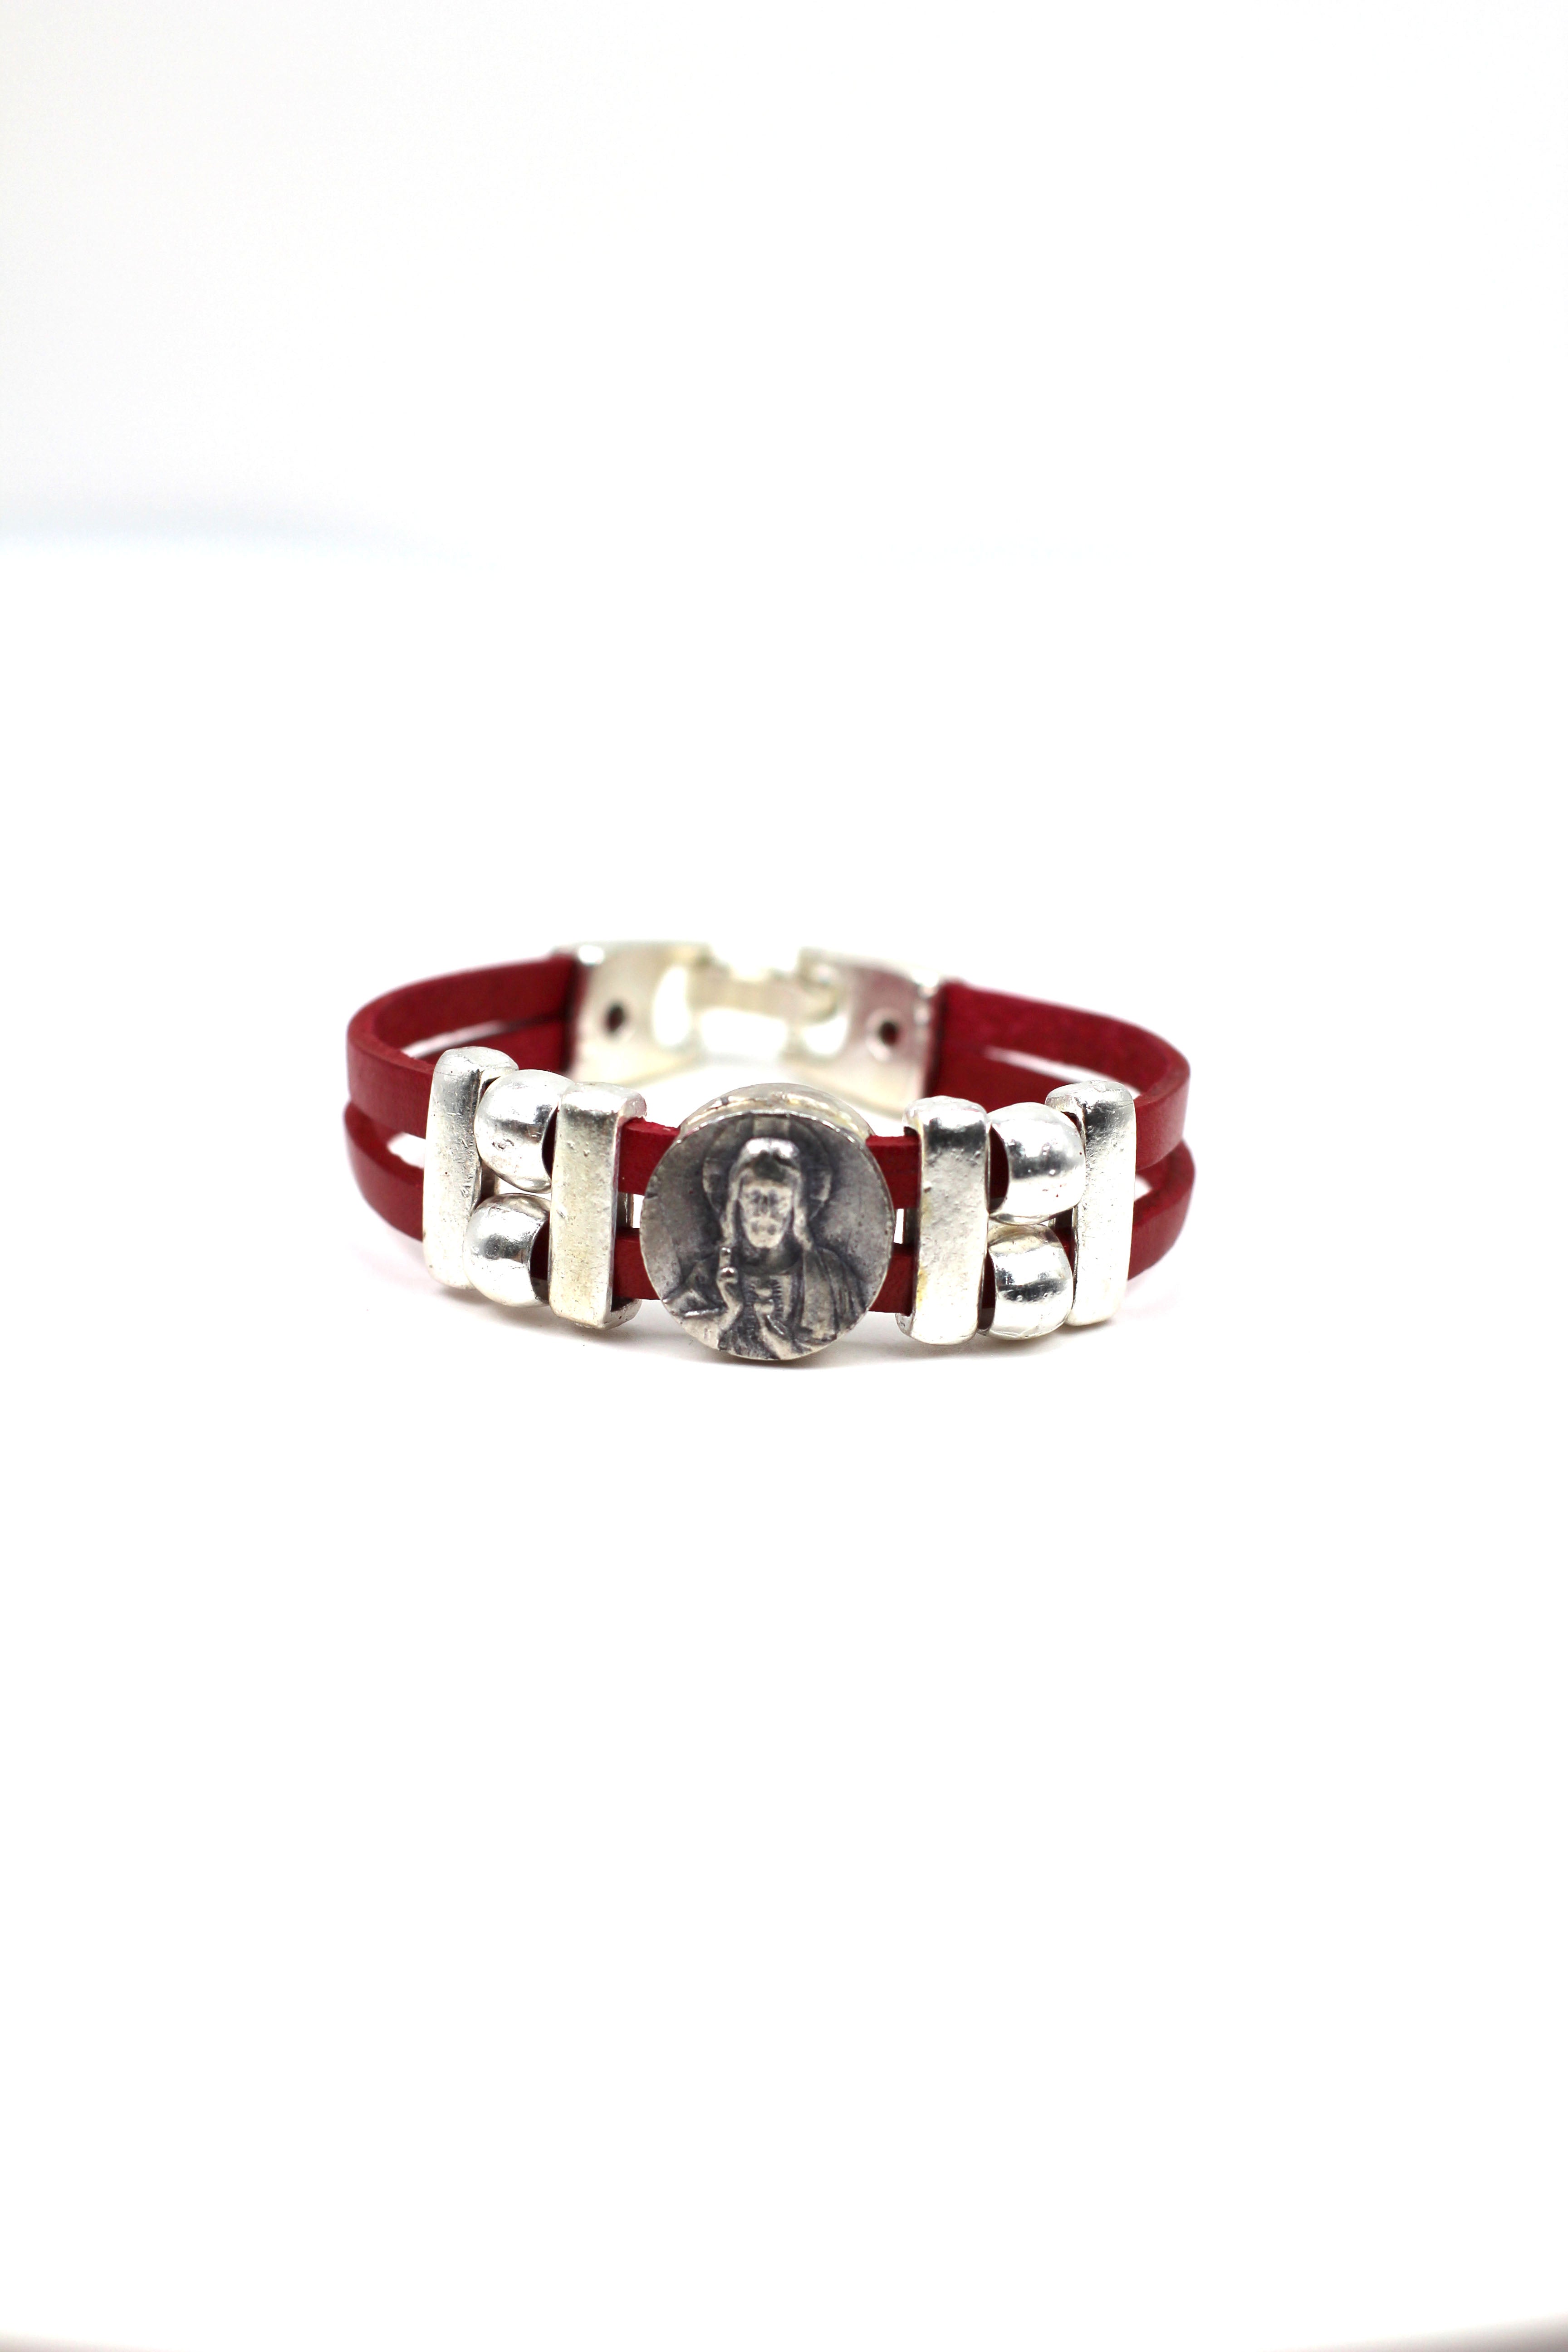 Vintage Sacred Heart bracelet handmade jewelry with Genuine Double Leather straps by Graciela's Collection